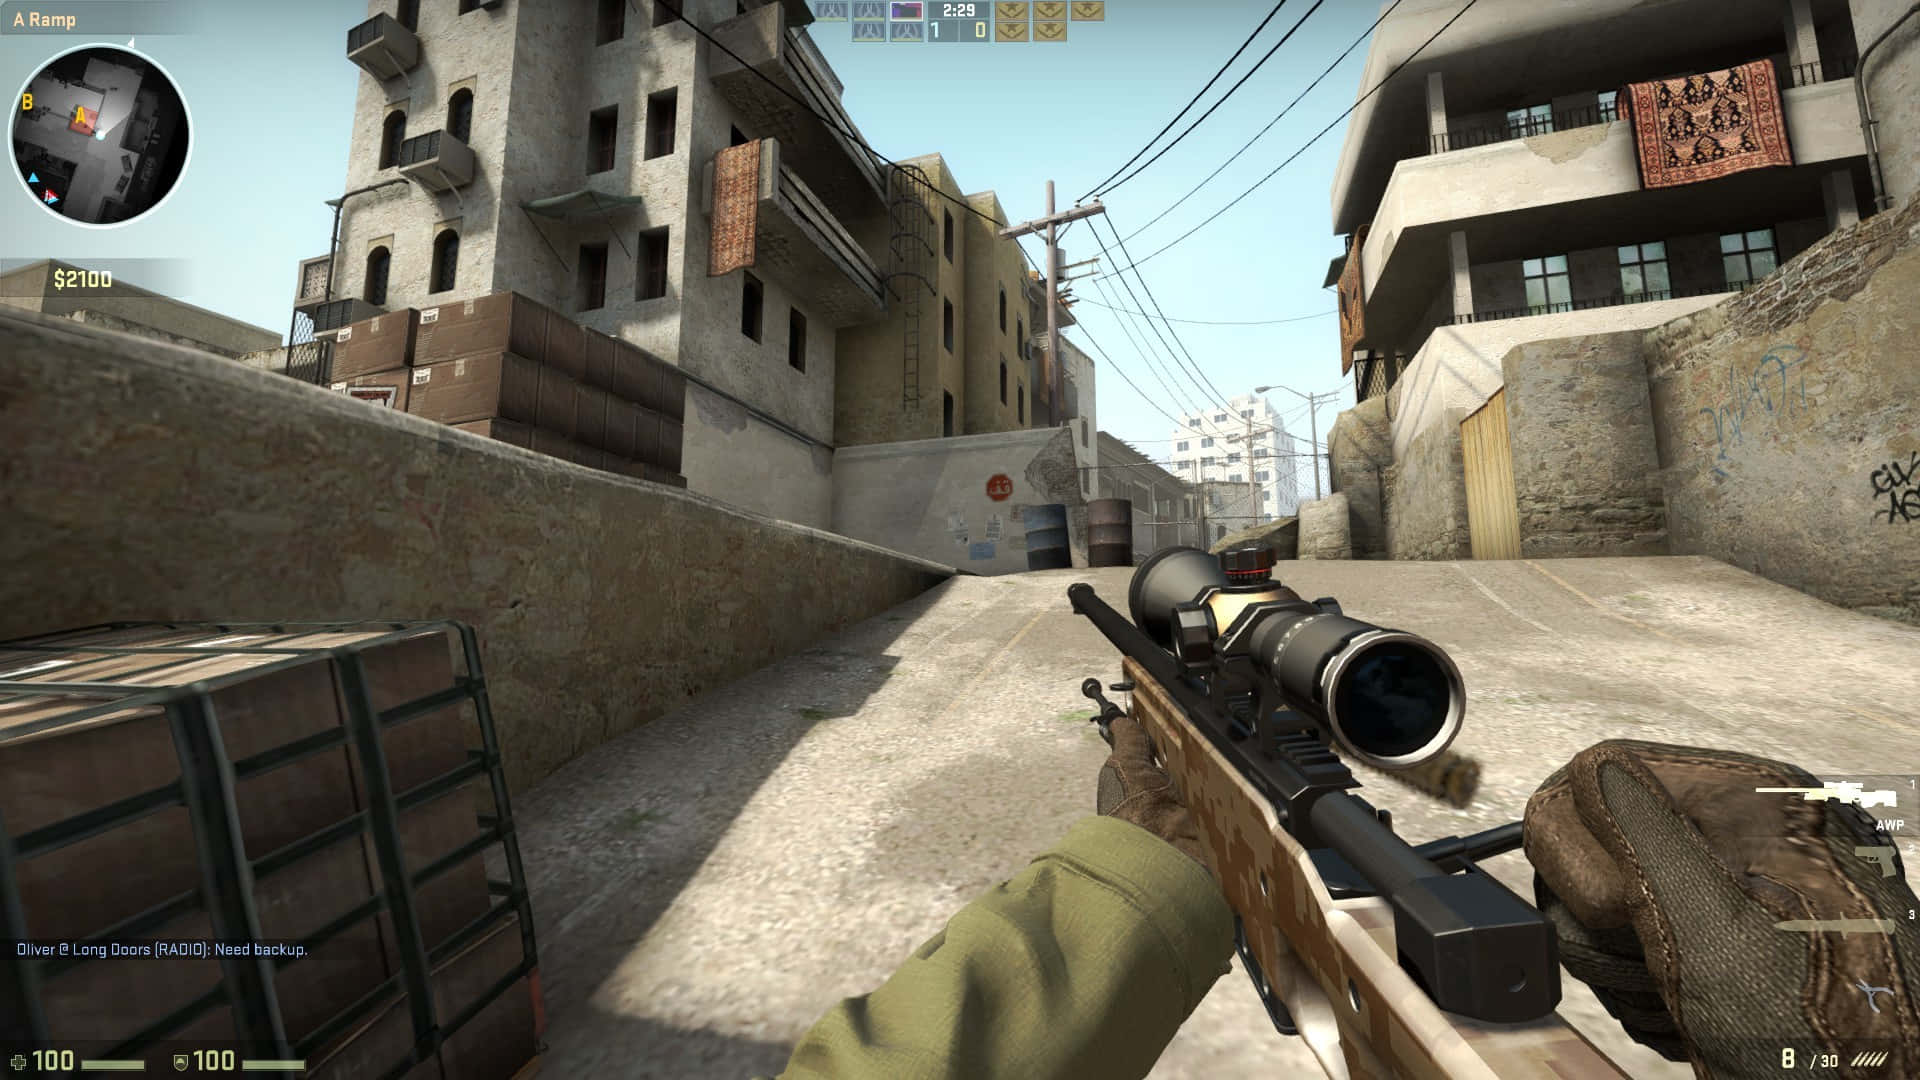 Shoot your way to become the best Counter-Strike Global Offensive player.